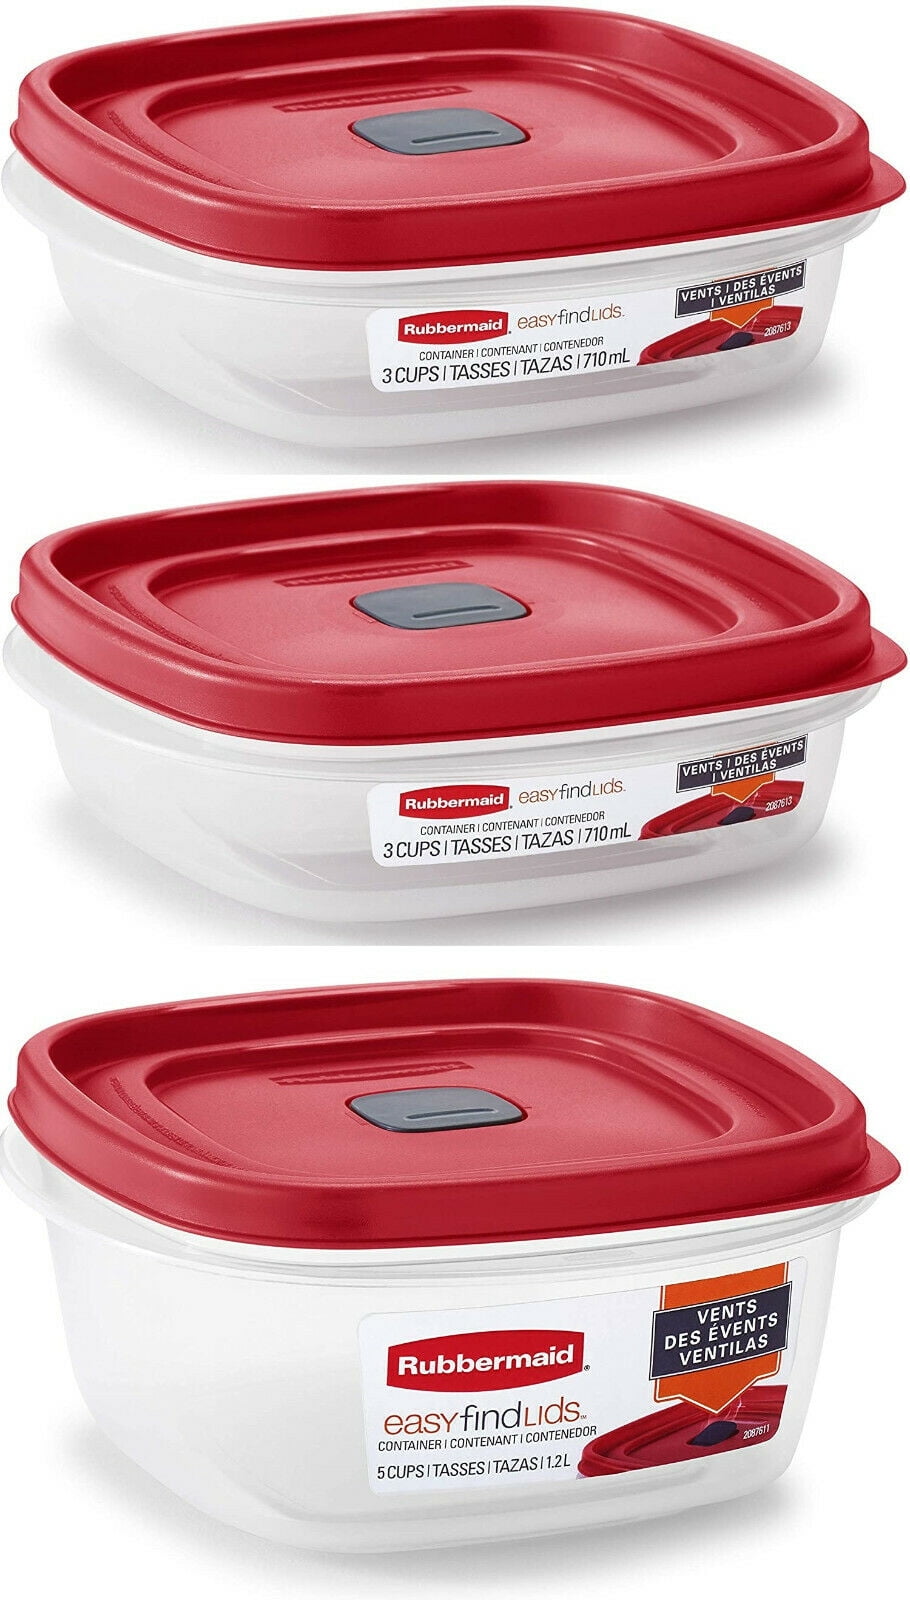 Rubbermaid Easy Find Vented Lid Food Storage Containers, 5 Cup 